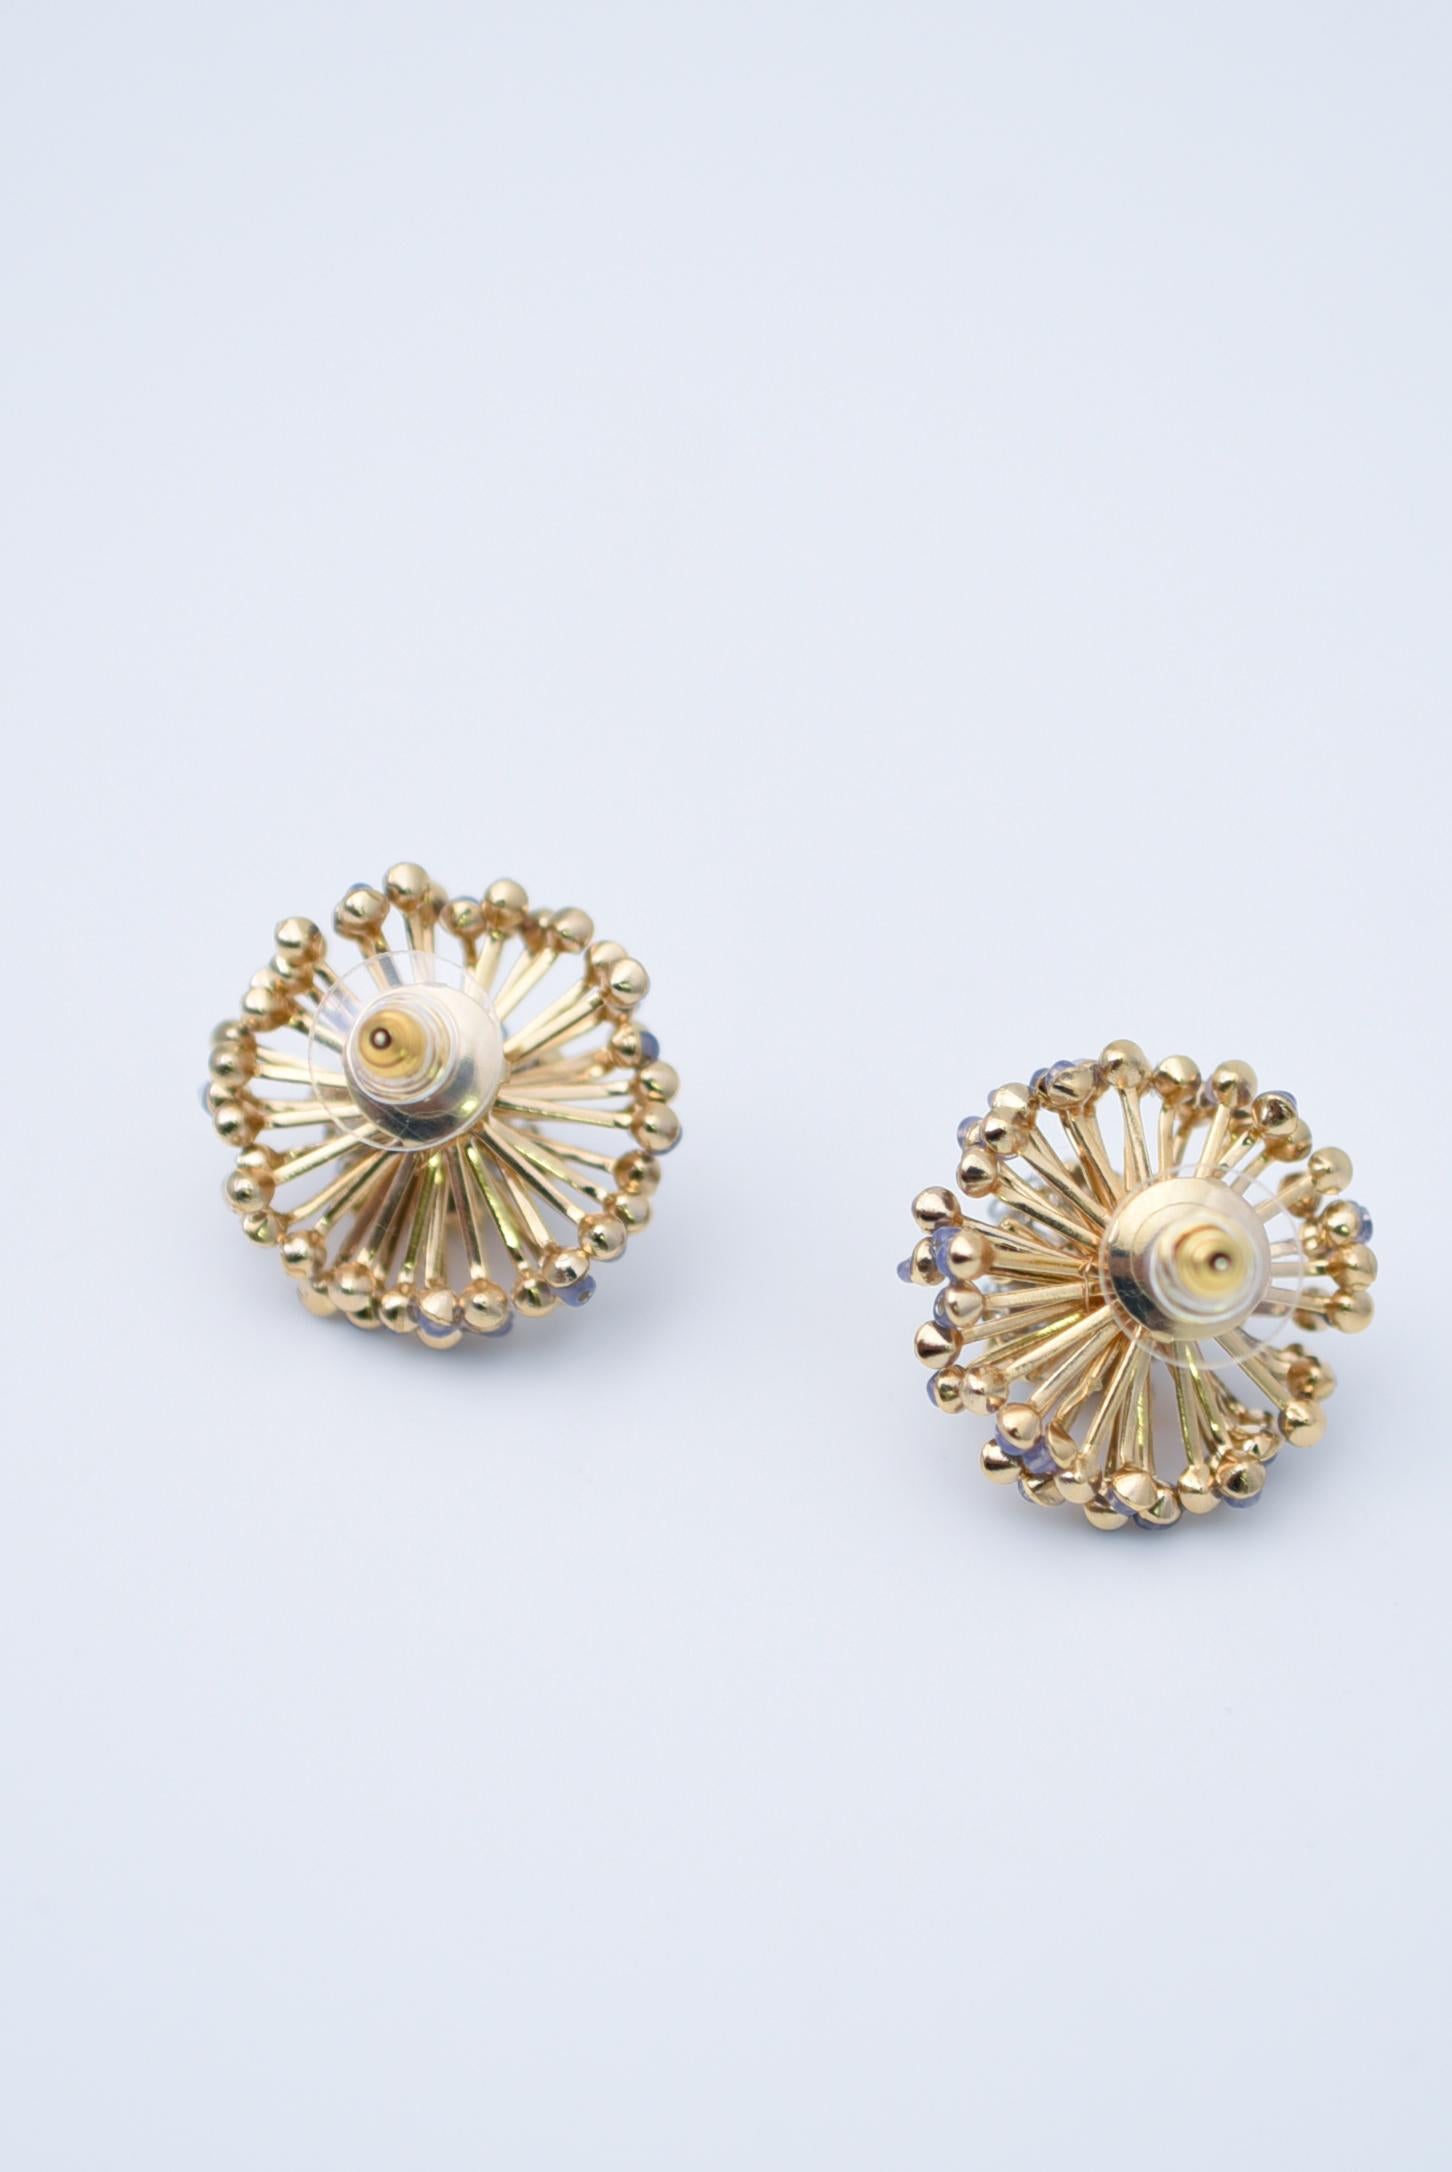 material:brass,glass beads,stainless
size: length 2.5cm

This series is based on the flower of Scabiosa. The flowers are made by setting beads one by one on petals made of delicate metal lines and carefully crafted with many layered parts to